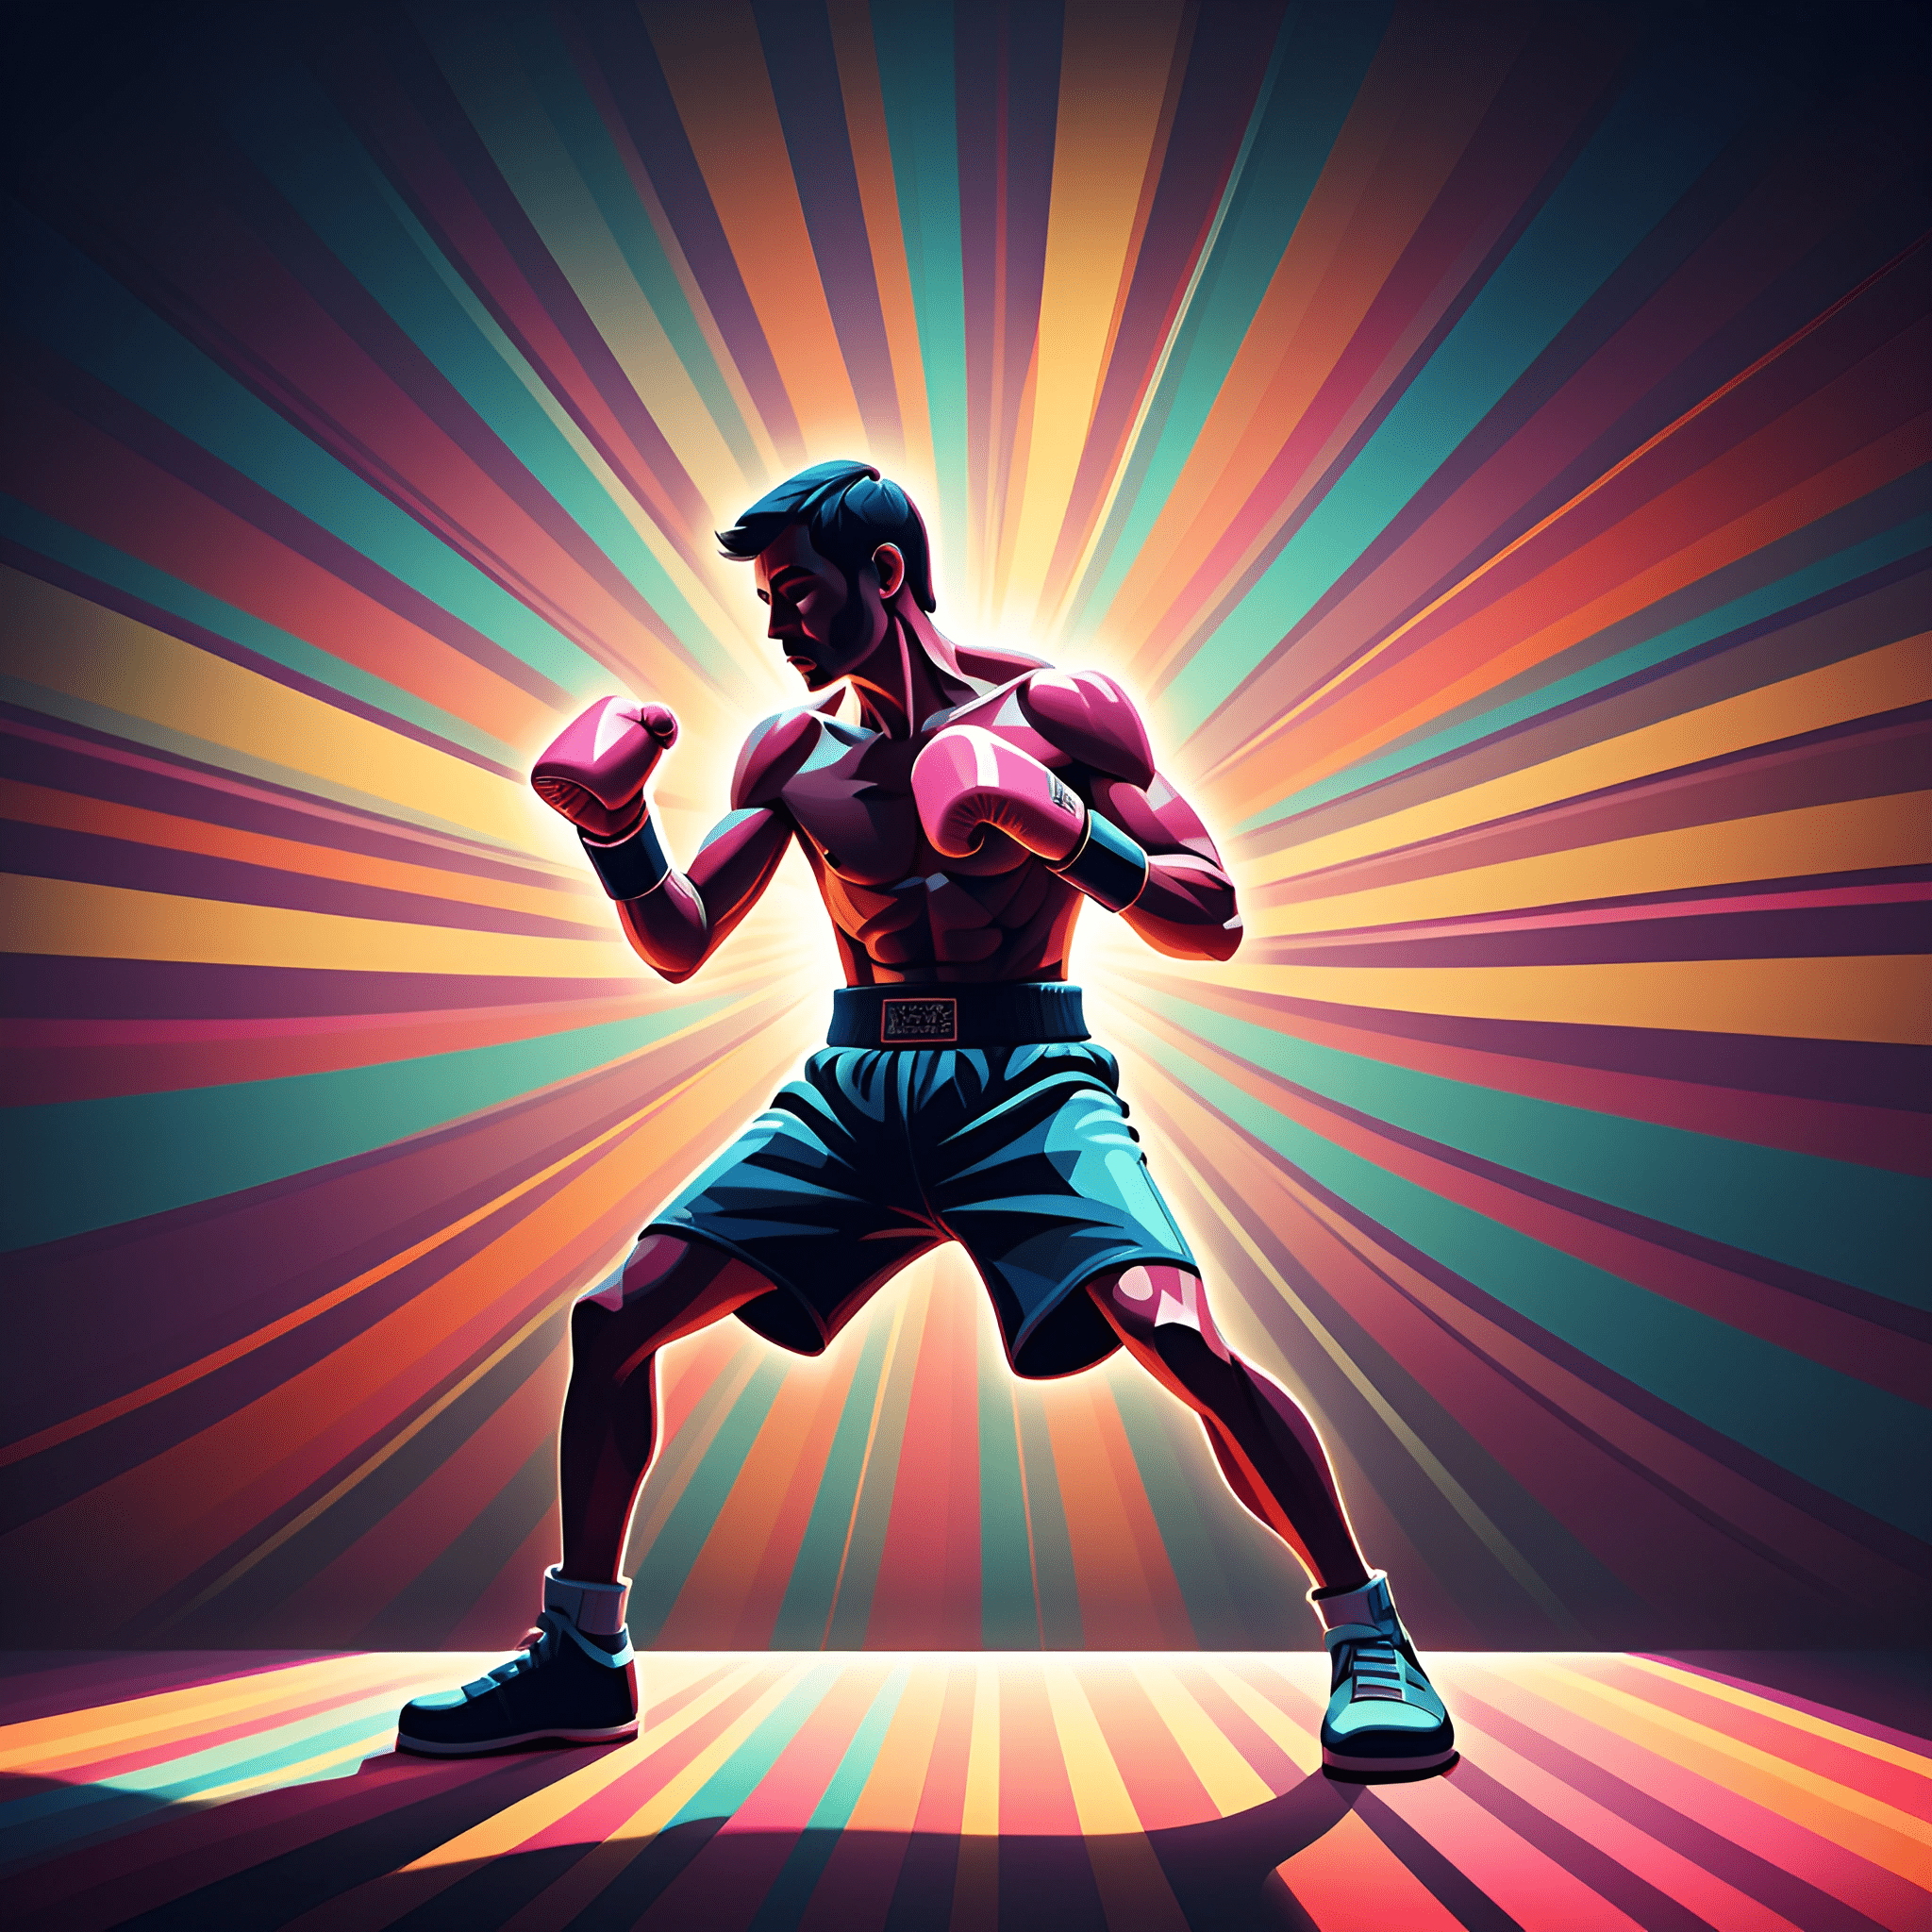 brightly colored illustration of a boxer in a stance with his fists raised